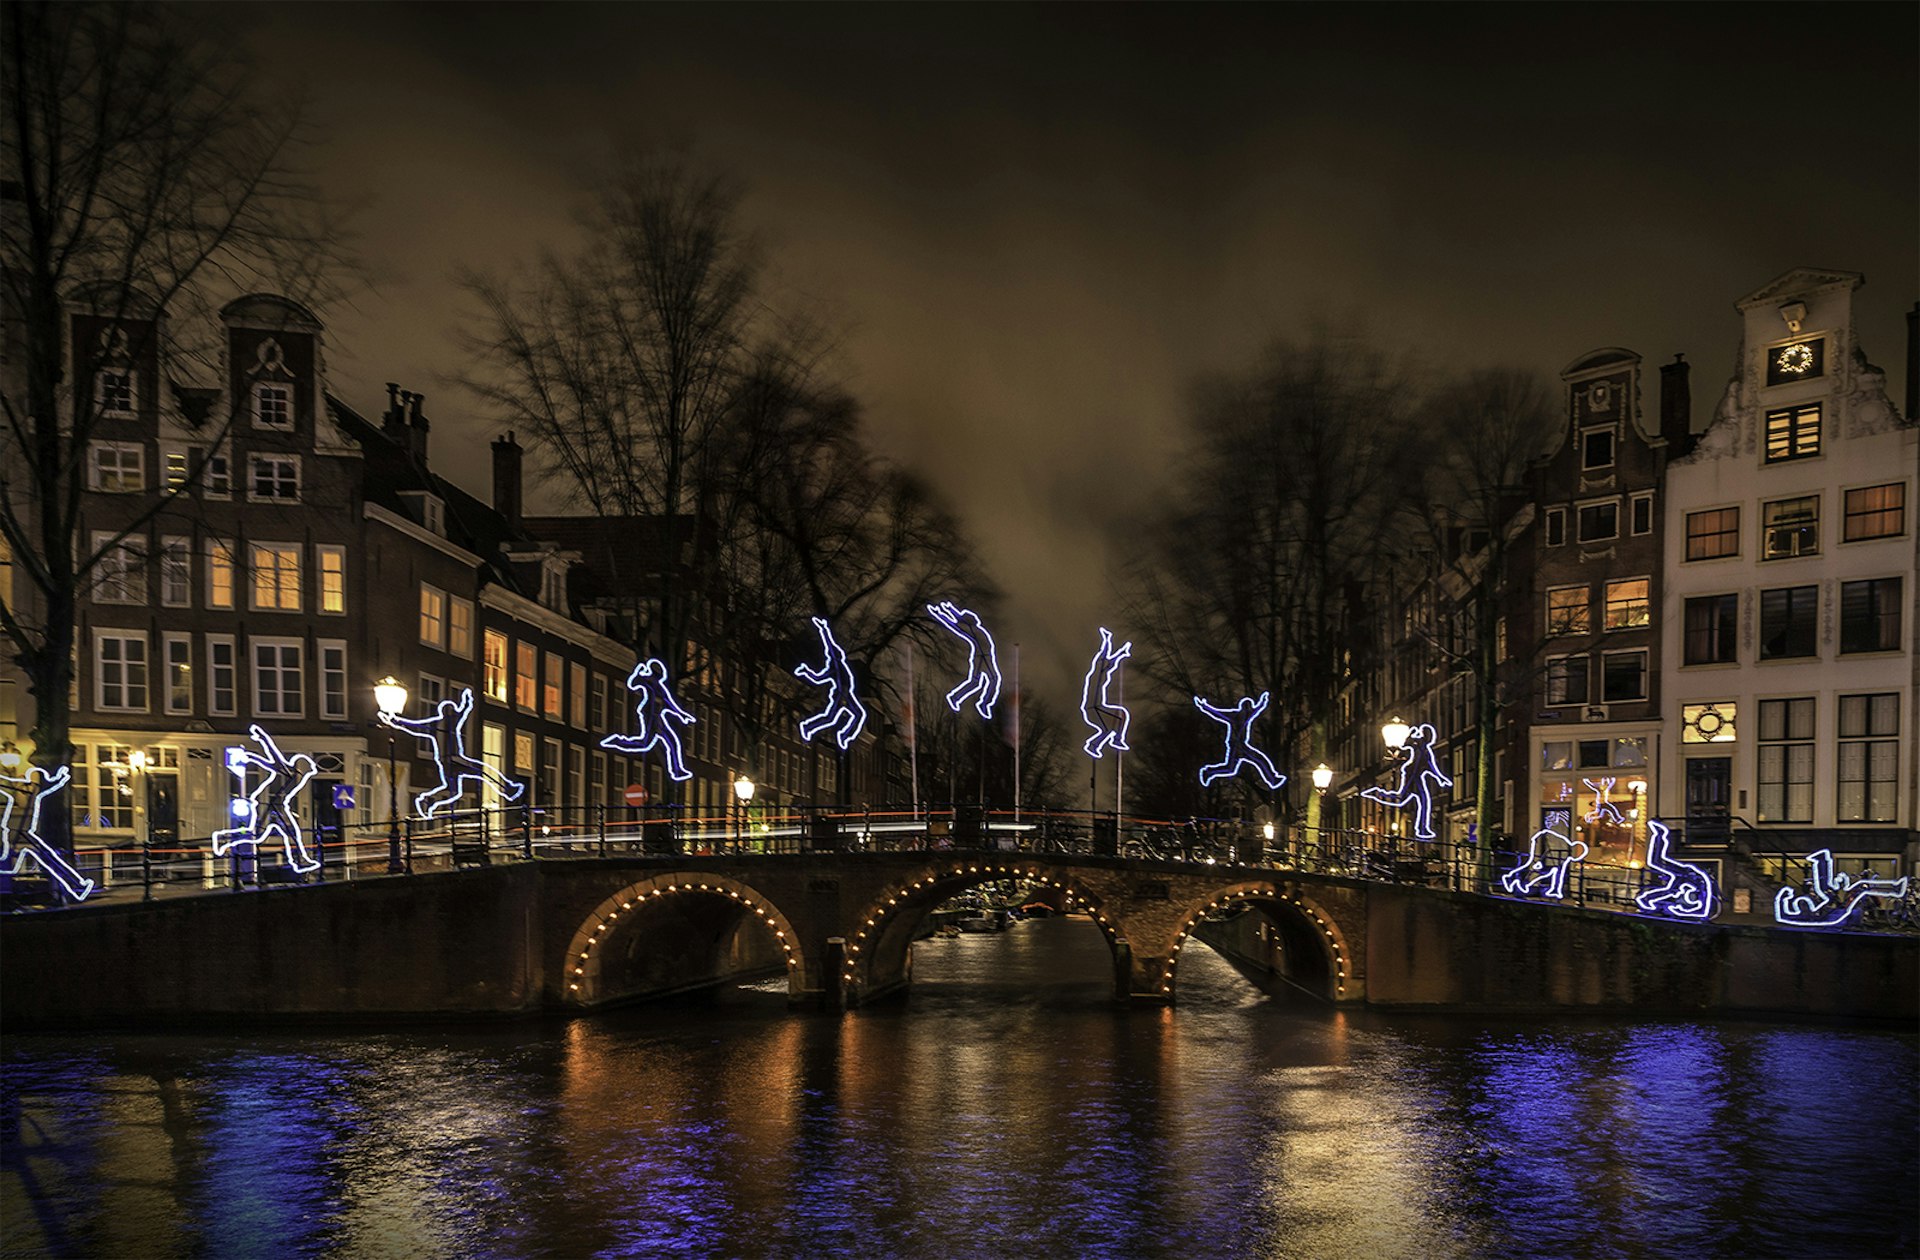 A light installation on a canal bridge in Amsterdam